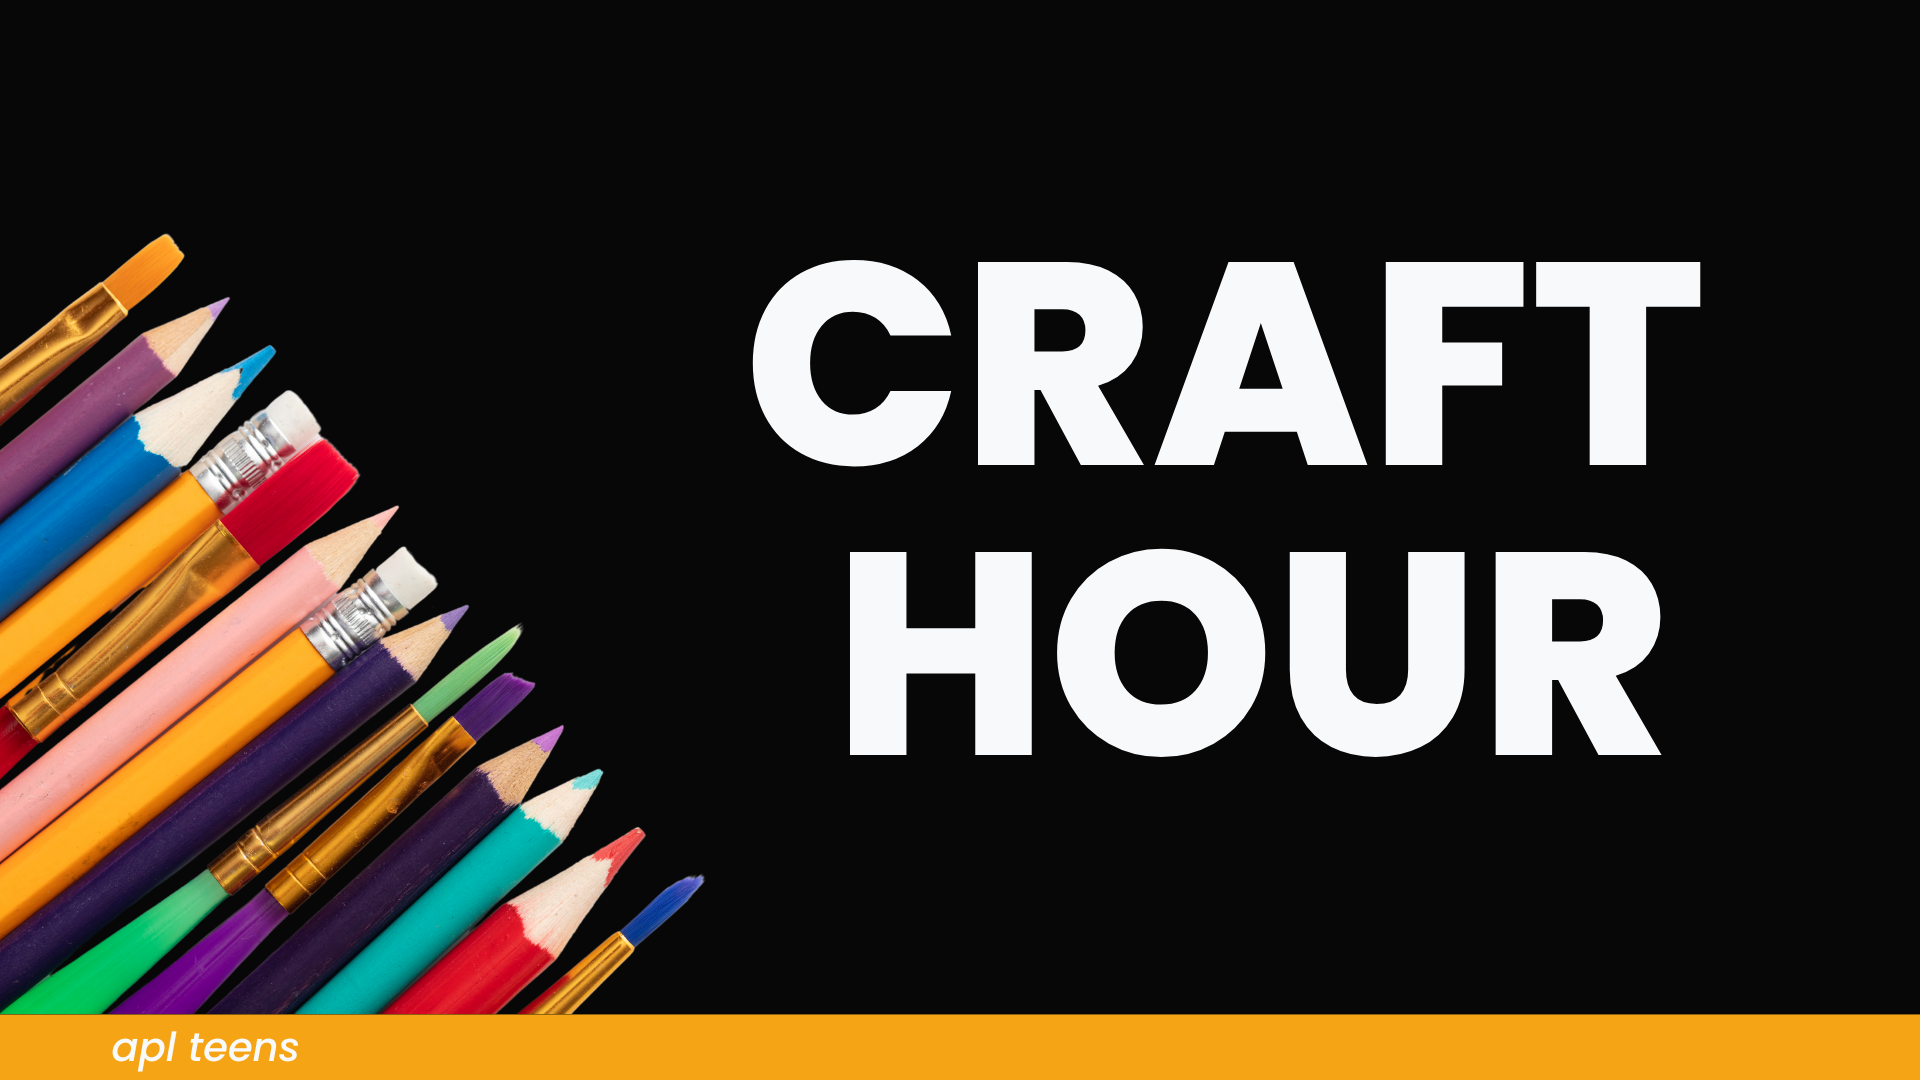 Pens, pencils, and paint brushes with Craft Hour in white